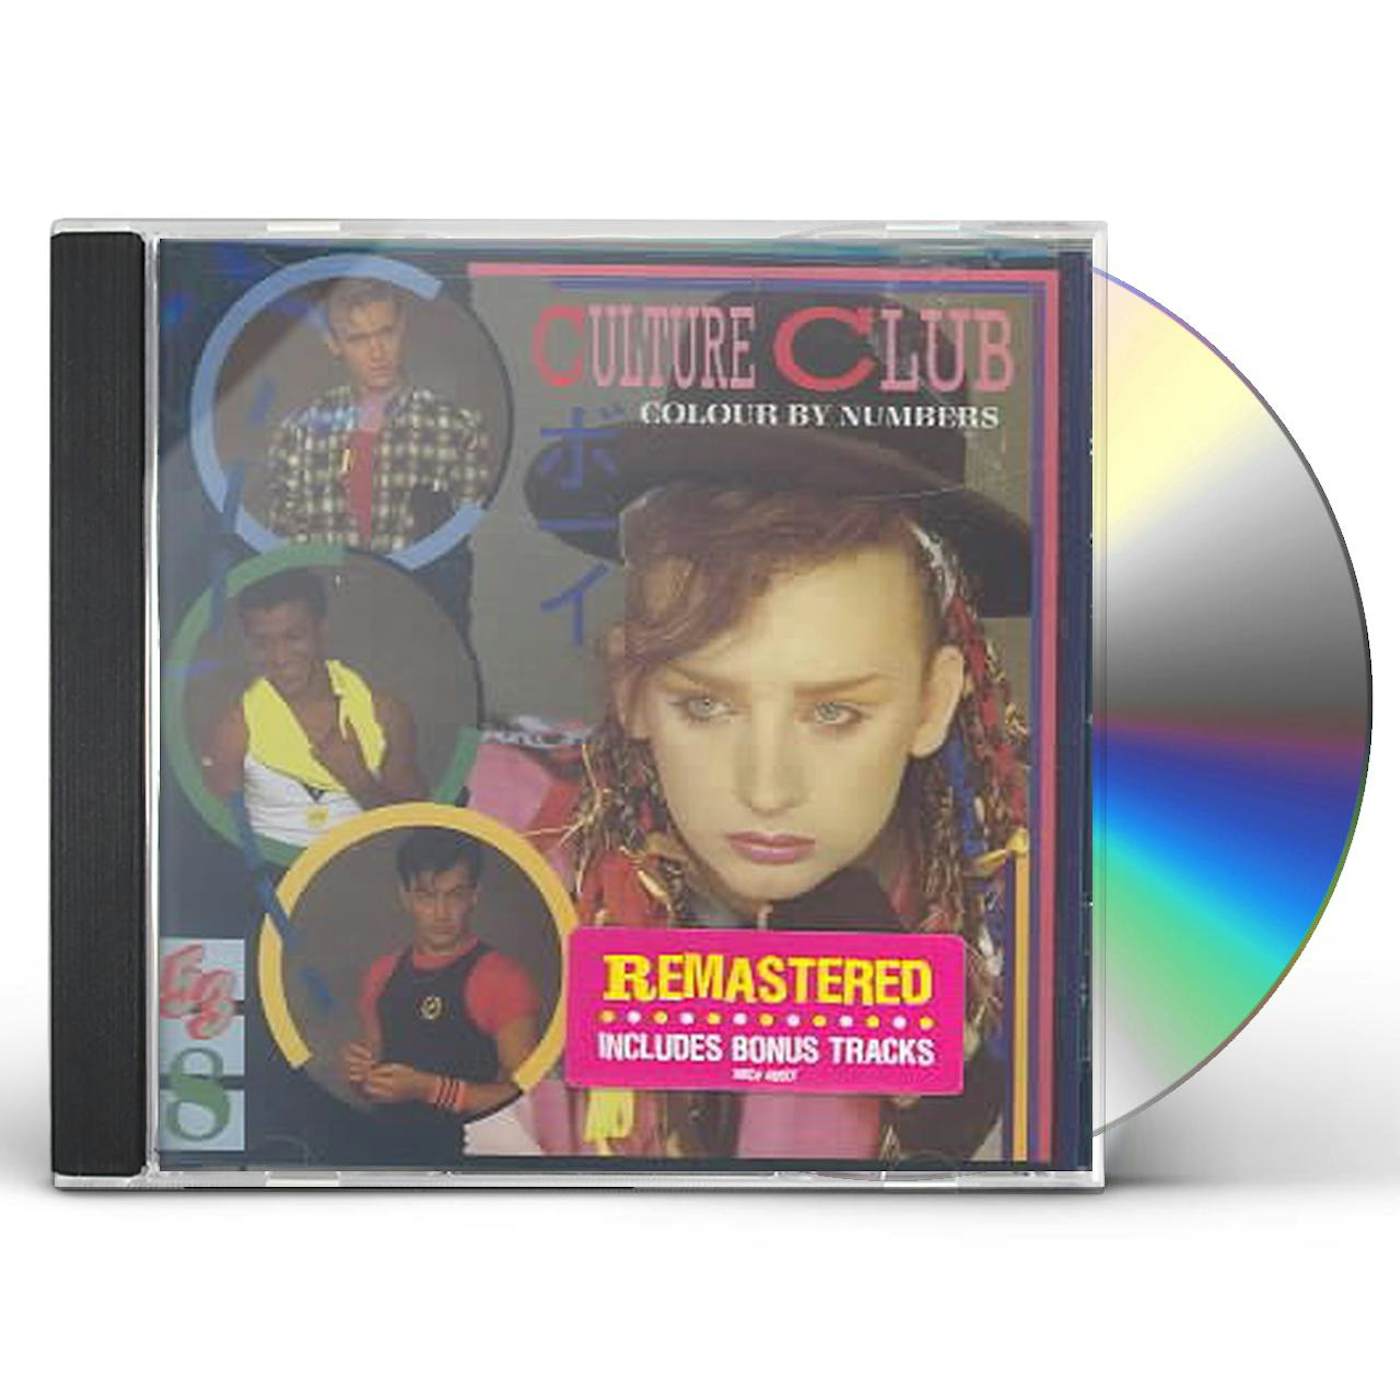 Culture Club Colour By Numbers CD